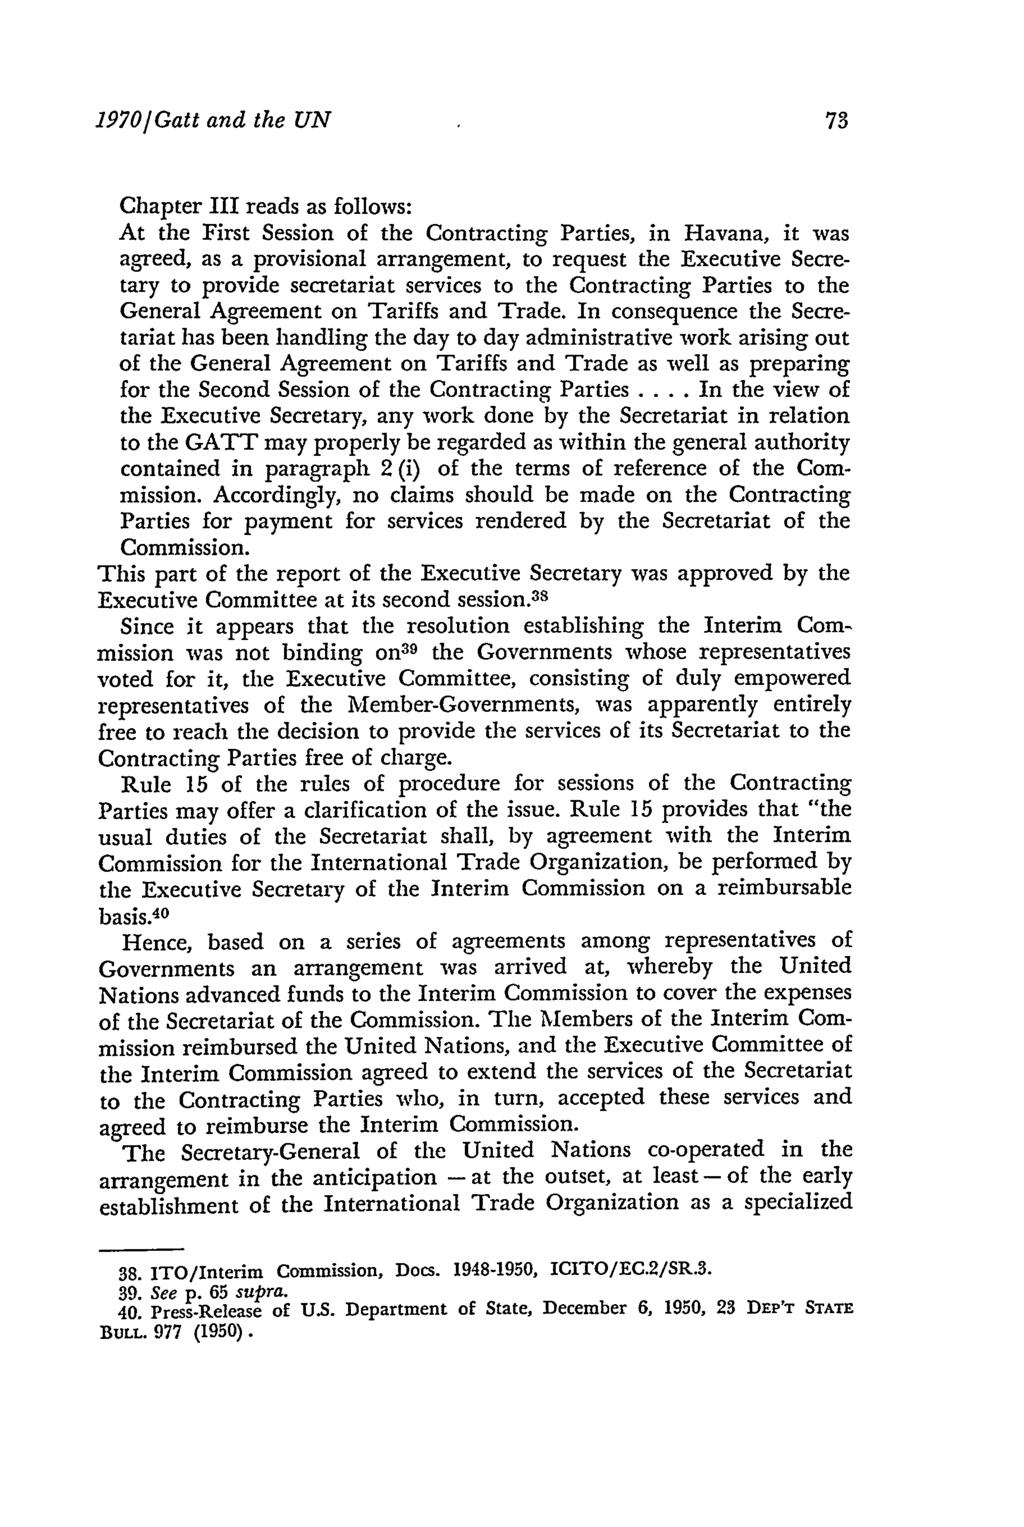 1970]Gatt and the UN Chapter III reads as follows: At the First Session of the Contracting Parties, in Havana, it was agreed, as a provisional arrangement, to request the Executive Secretary to